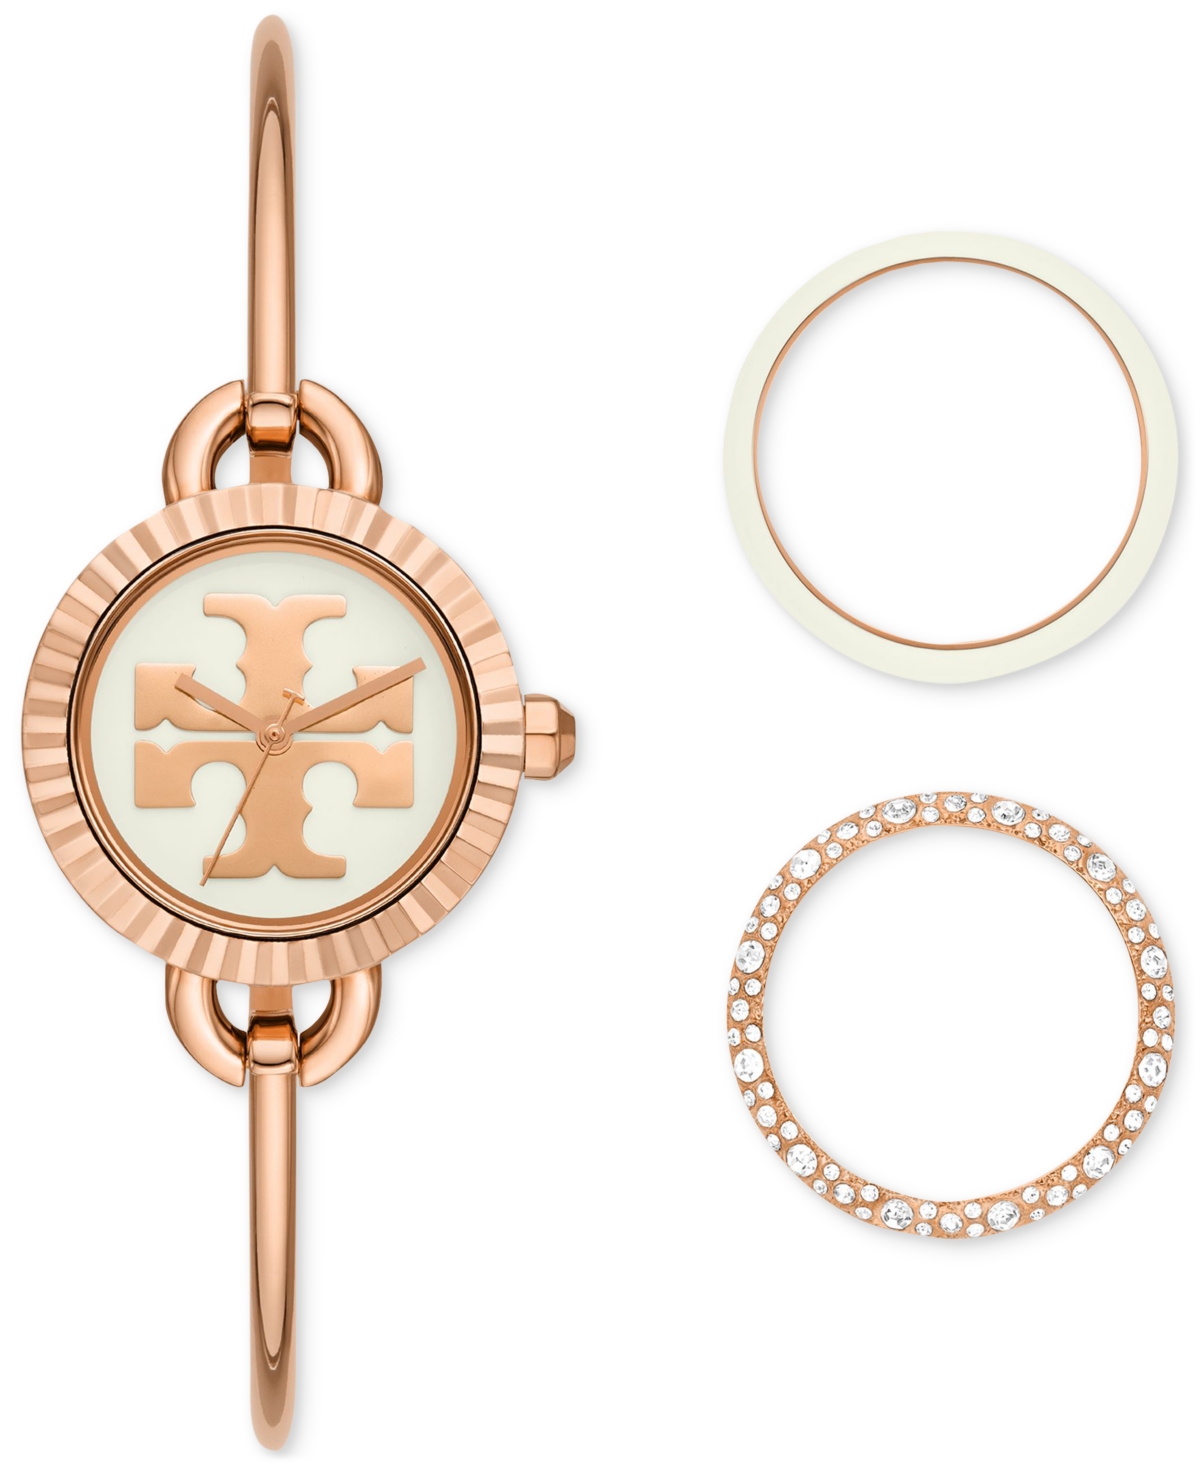 Tory Burch Women's The Miller Rose Gold-tone Stainless Steel Bangle Bracelet Watch 27mm Set